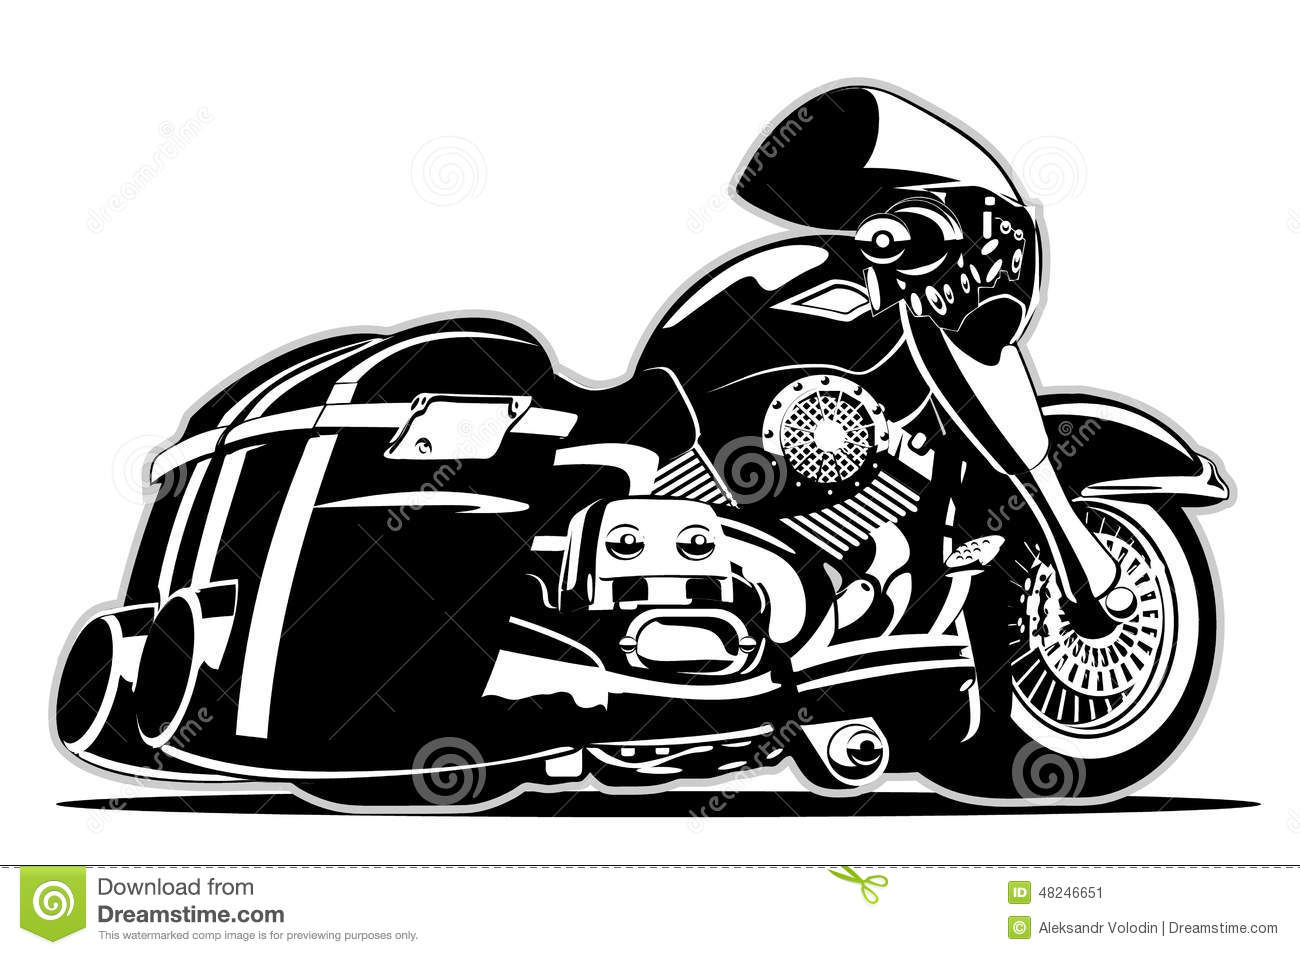 free vector motorcycle clipart - photo #20